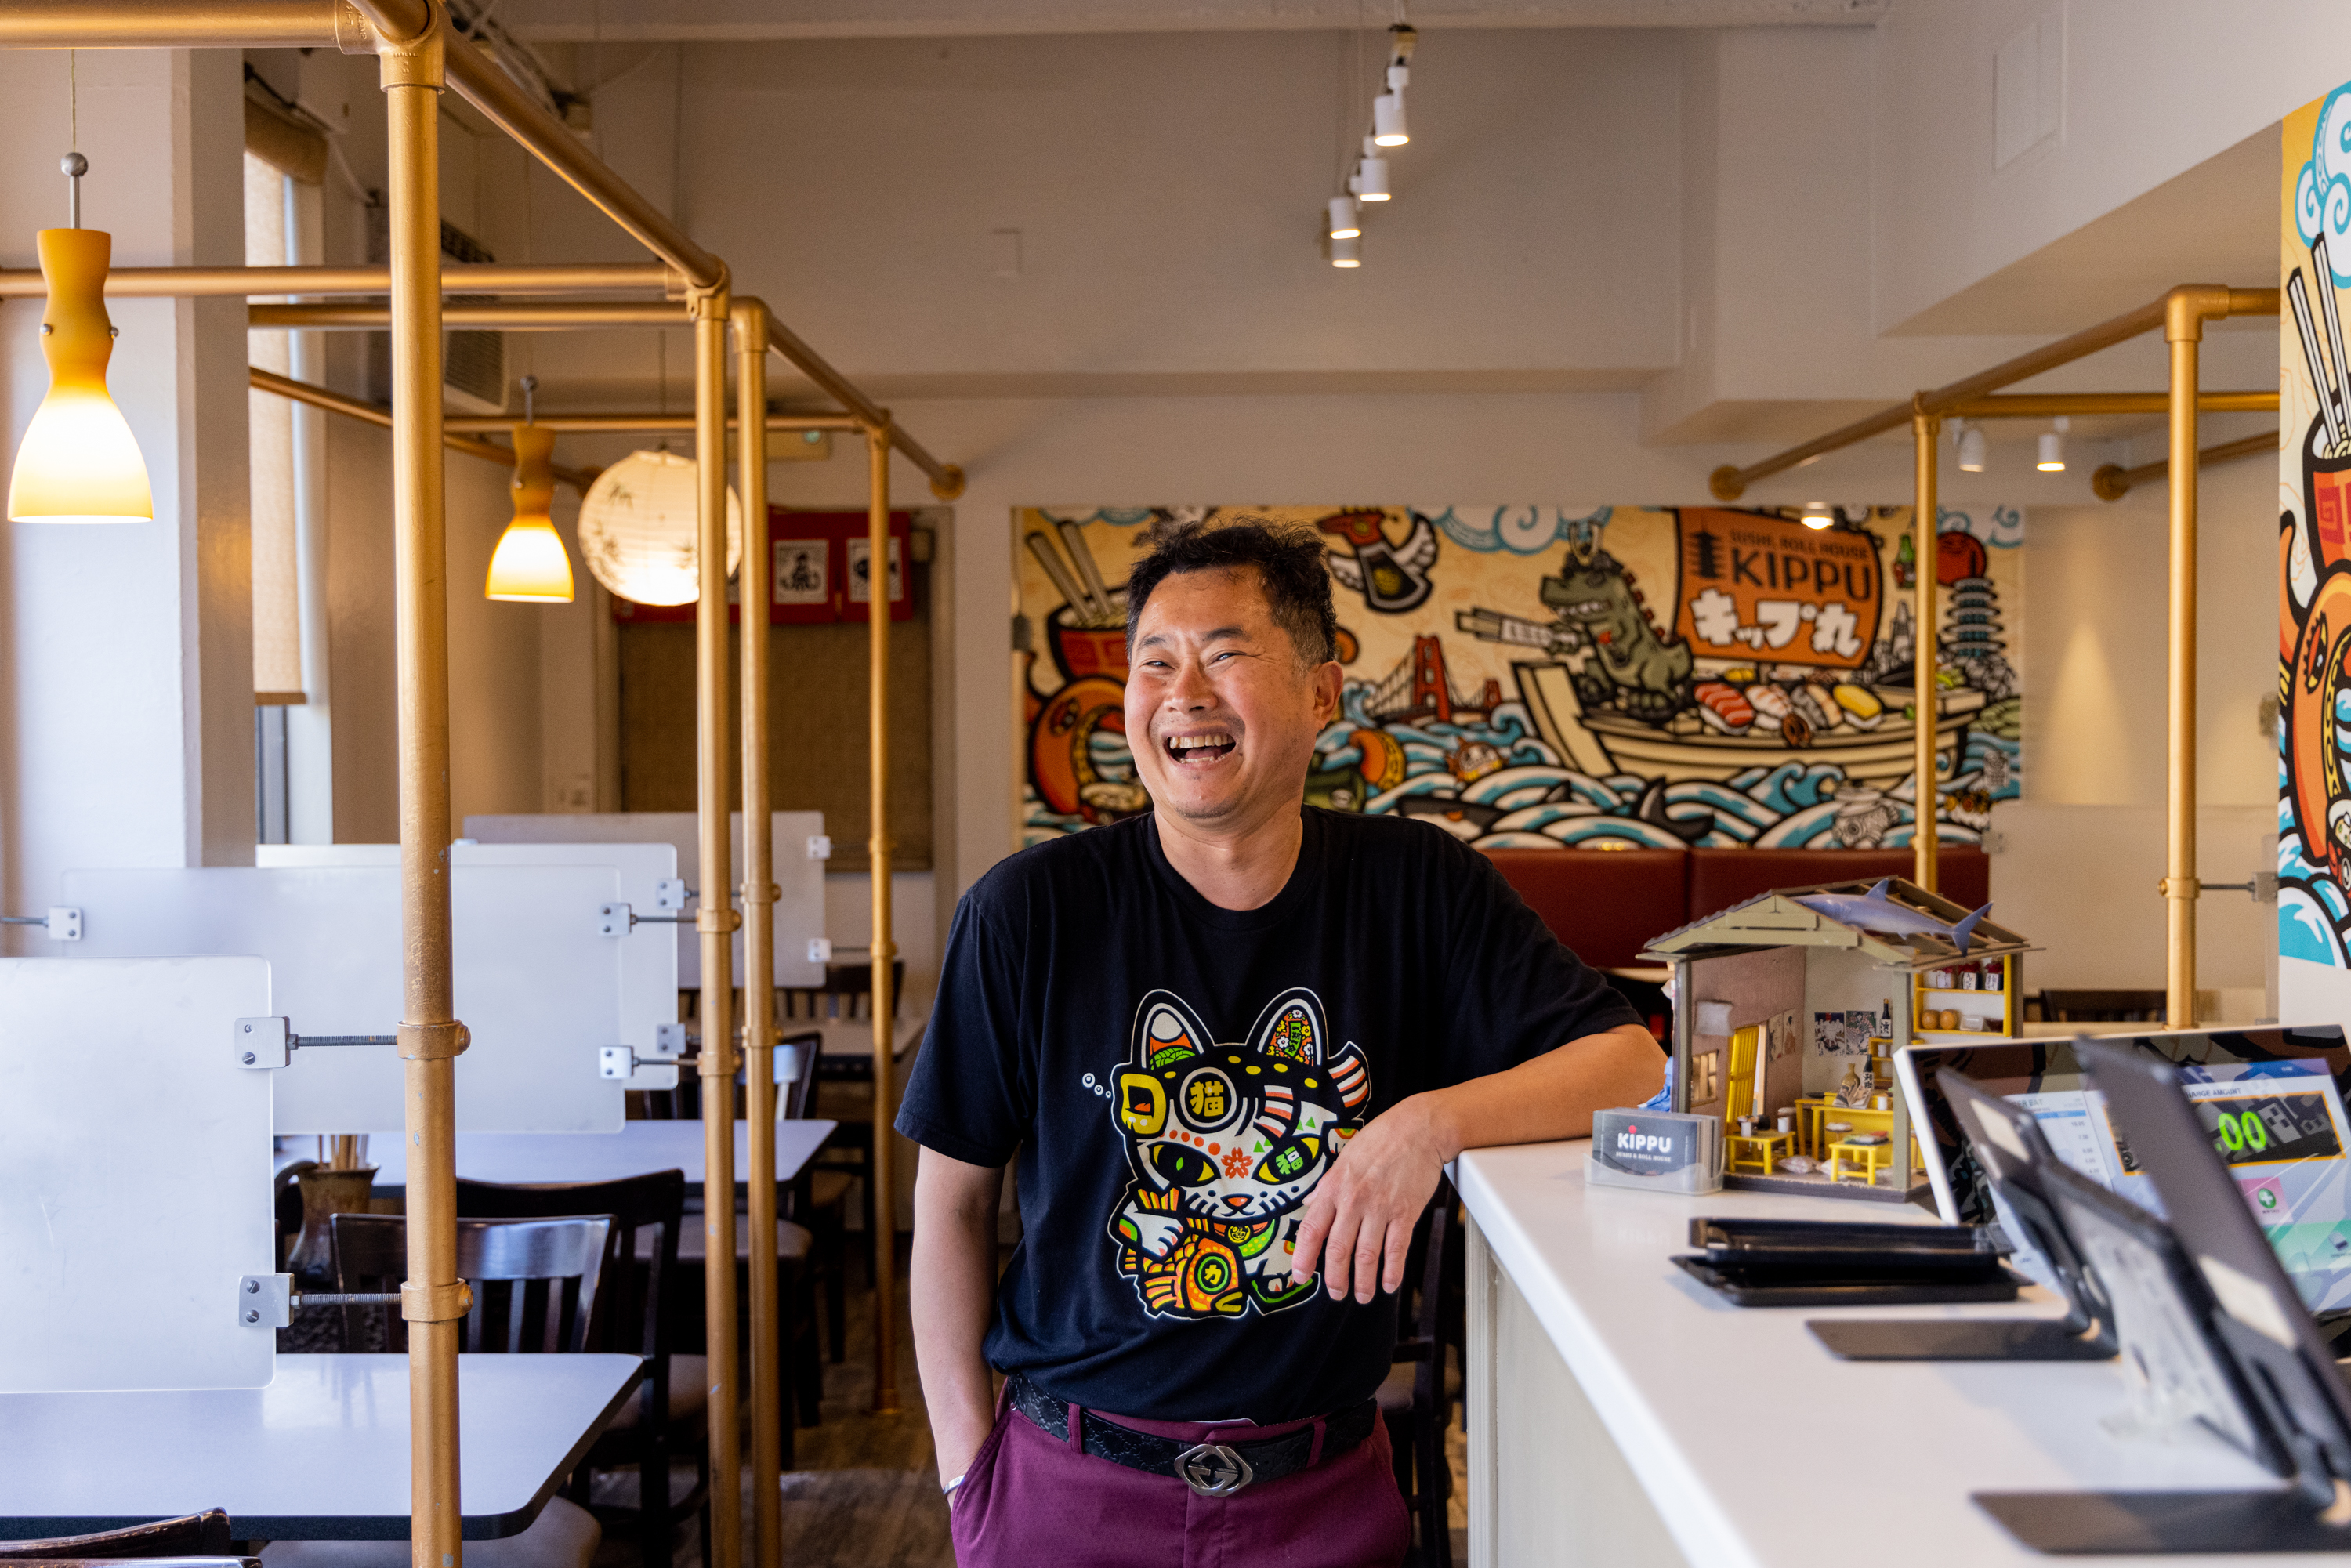 A man is laughing while standing in a brightly lit, colorful restaurant with cartoon-inspired wall art, wearing a black T-shirt and maroon pants.